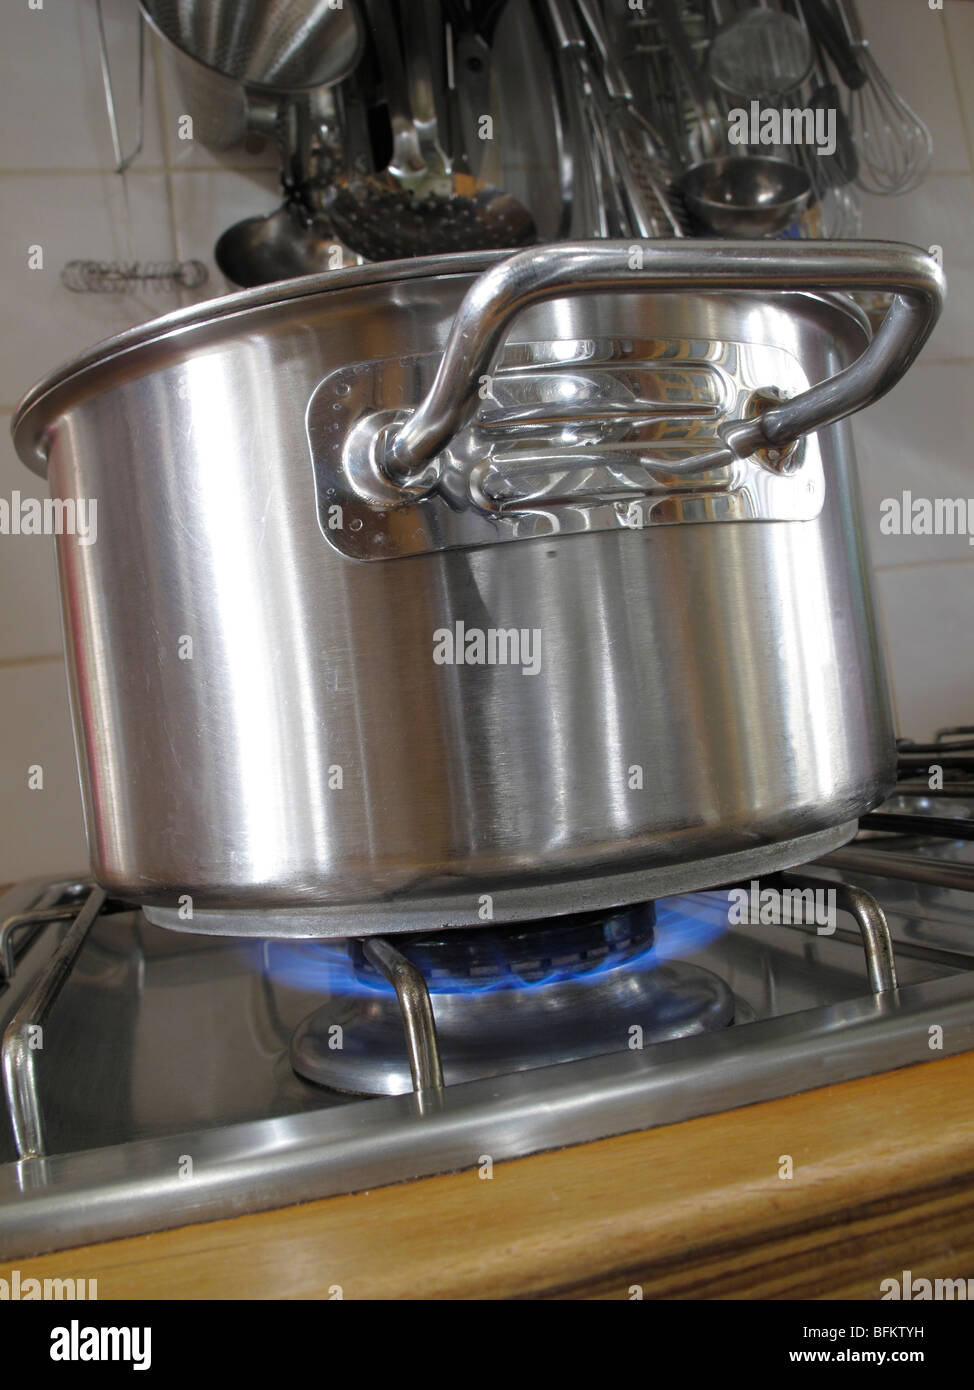 https://c8.alamy.com/comp/BFKTYH/cooking-pot-on-gas-flame-BFKTYH.jpg